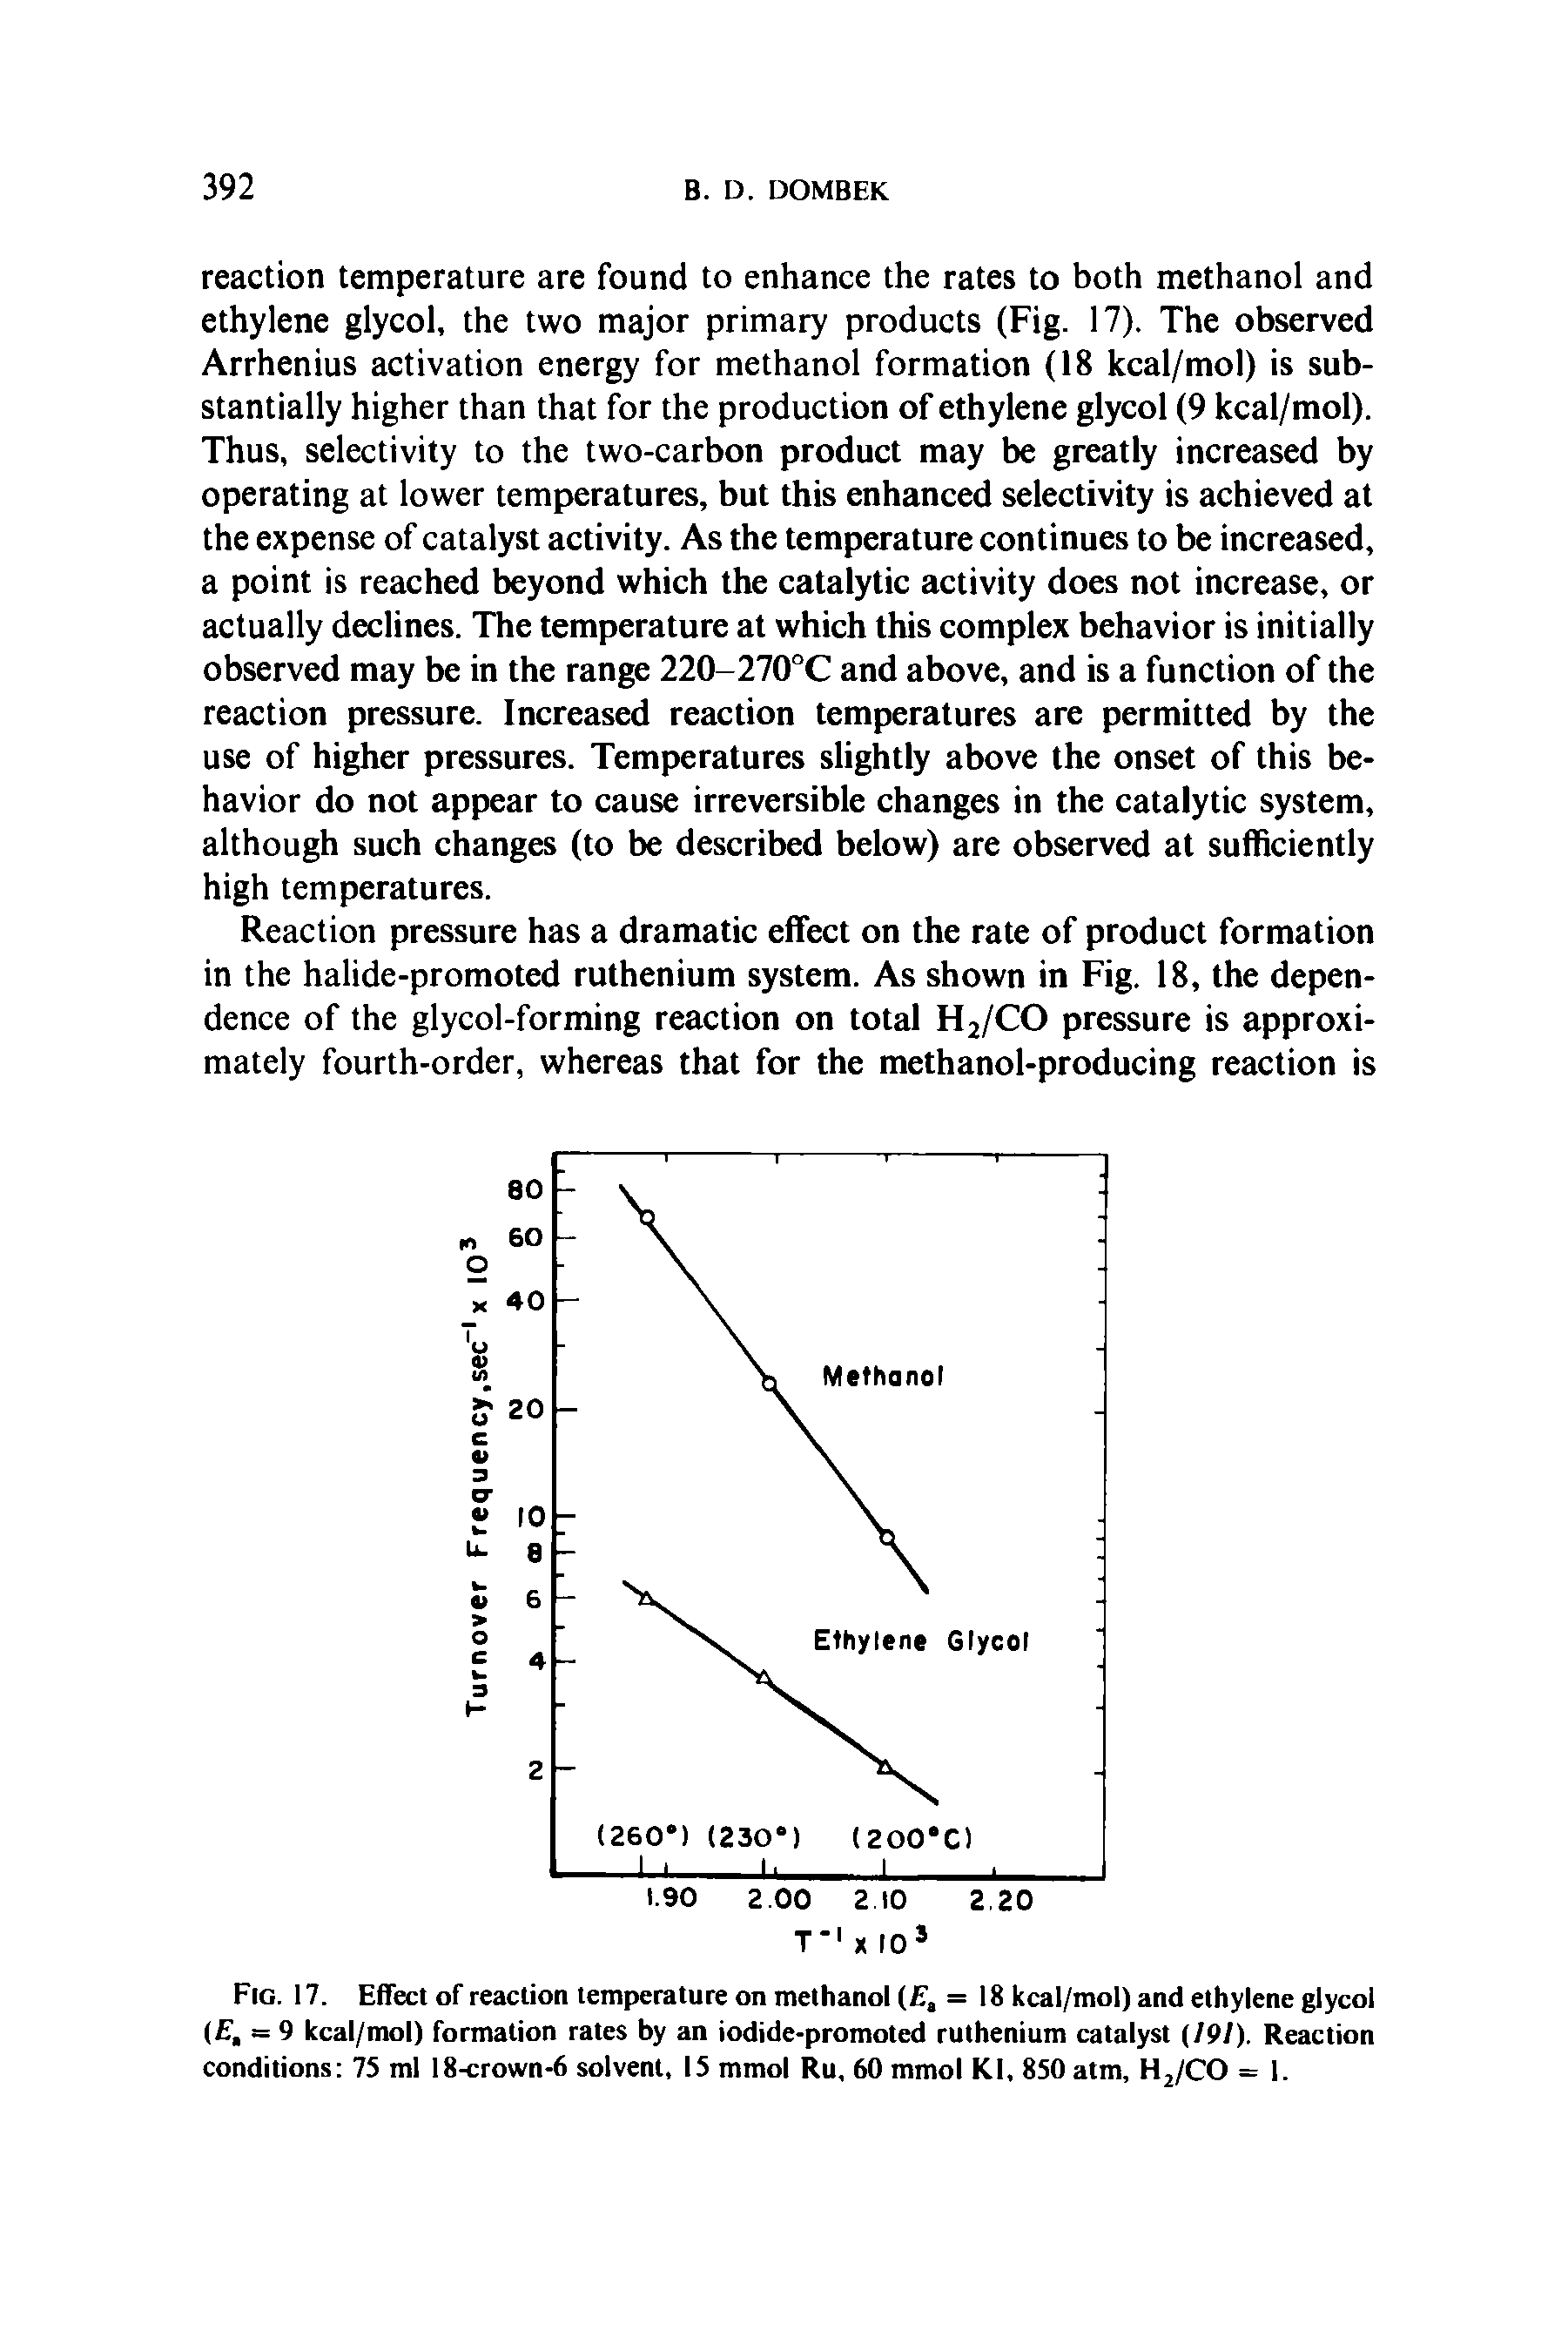 Fig. 17. Effect of reaction temperature on methanol ( = 18 kcal/mol) and ethylene glycol ( , = 9 kcal/mol) formation rates by an iodide-promoted ruthenium catalyst (191). Reaction conditions 75 ml 18-crown-6 solvent, 15 mmol Ru, 60 mmol KI, 850 atm, H2/CO = 1.